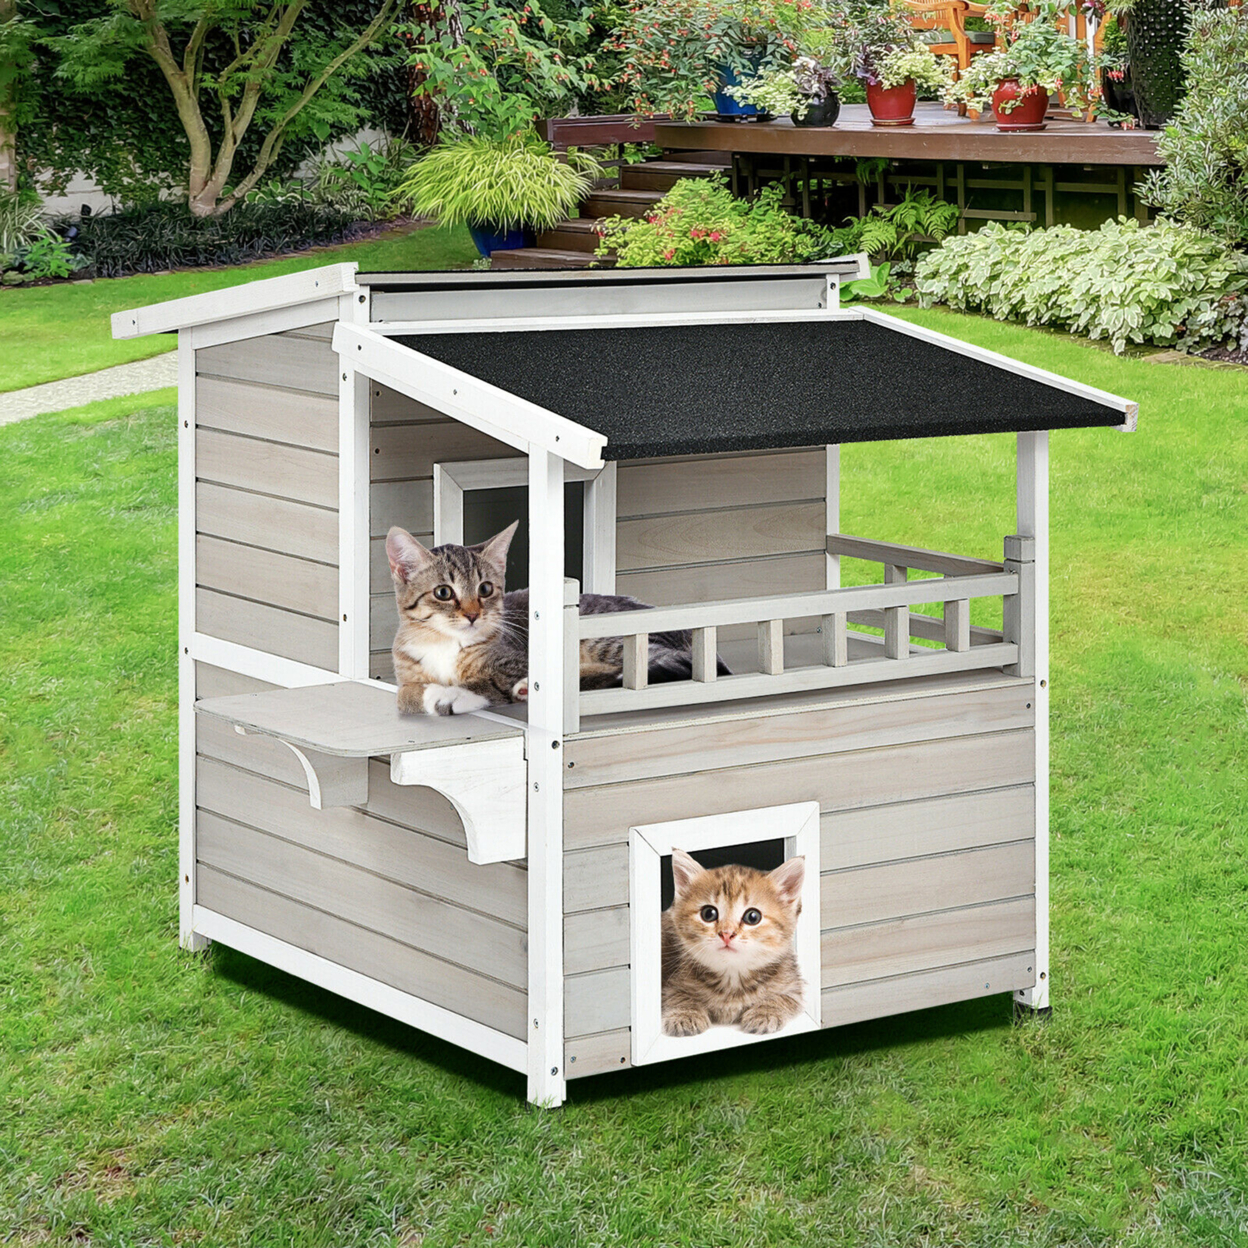 2-Story Wooden Patio Luxurious Cat Shelter House Condo W/ Large Balcony